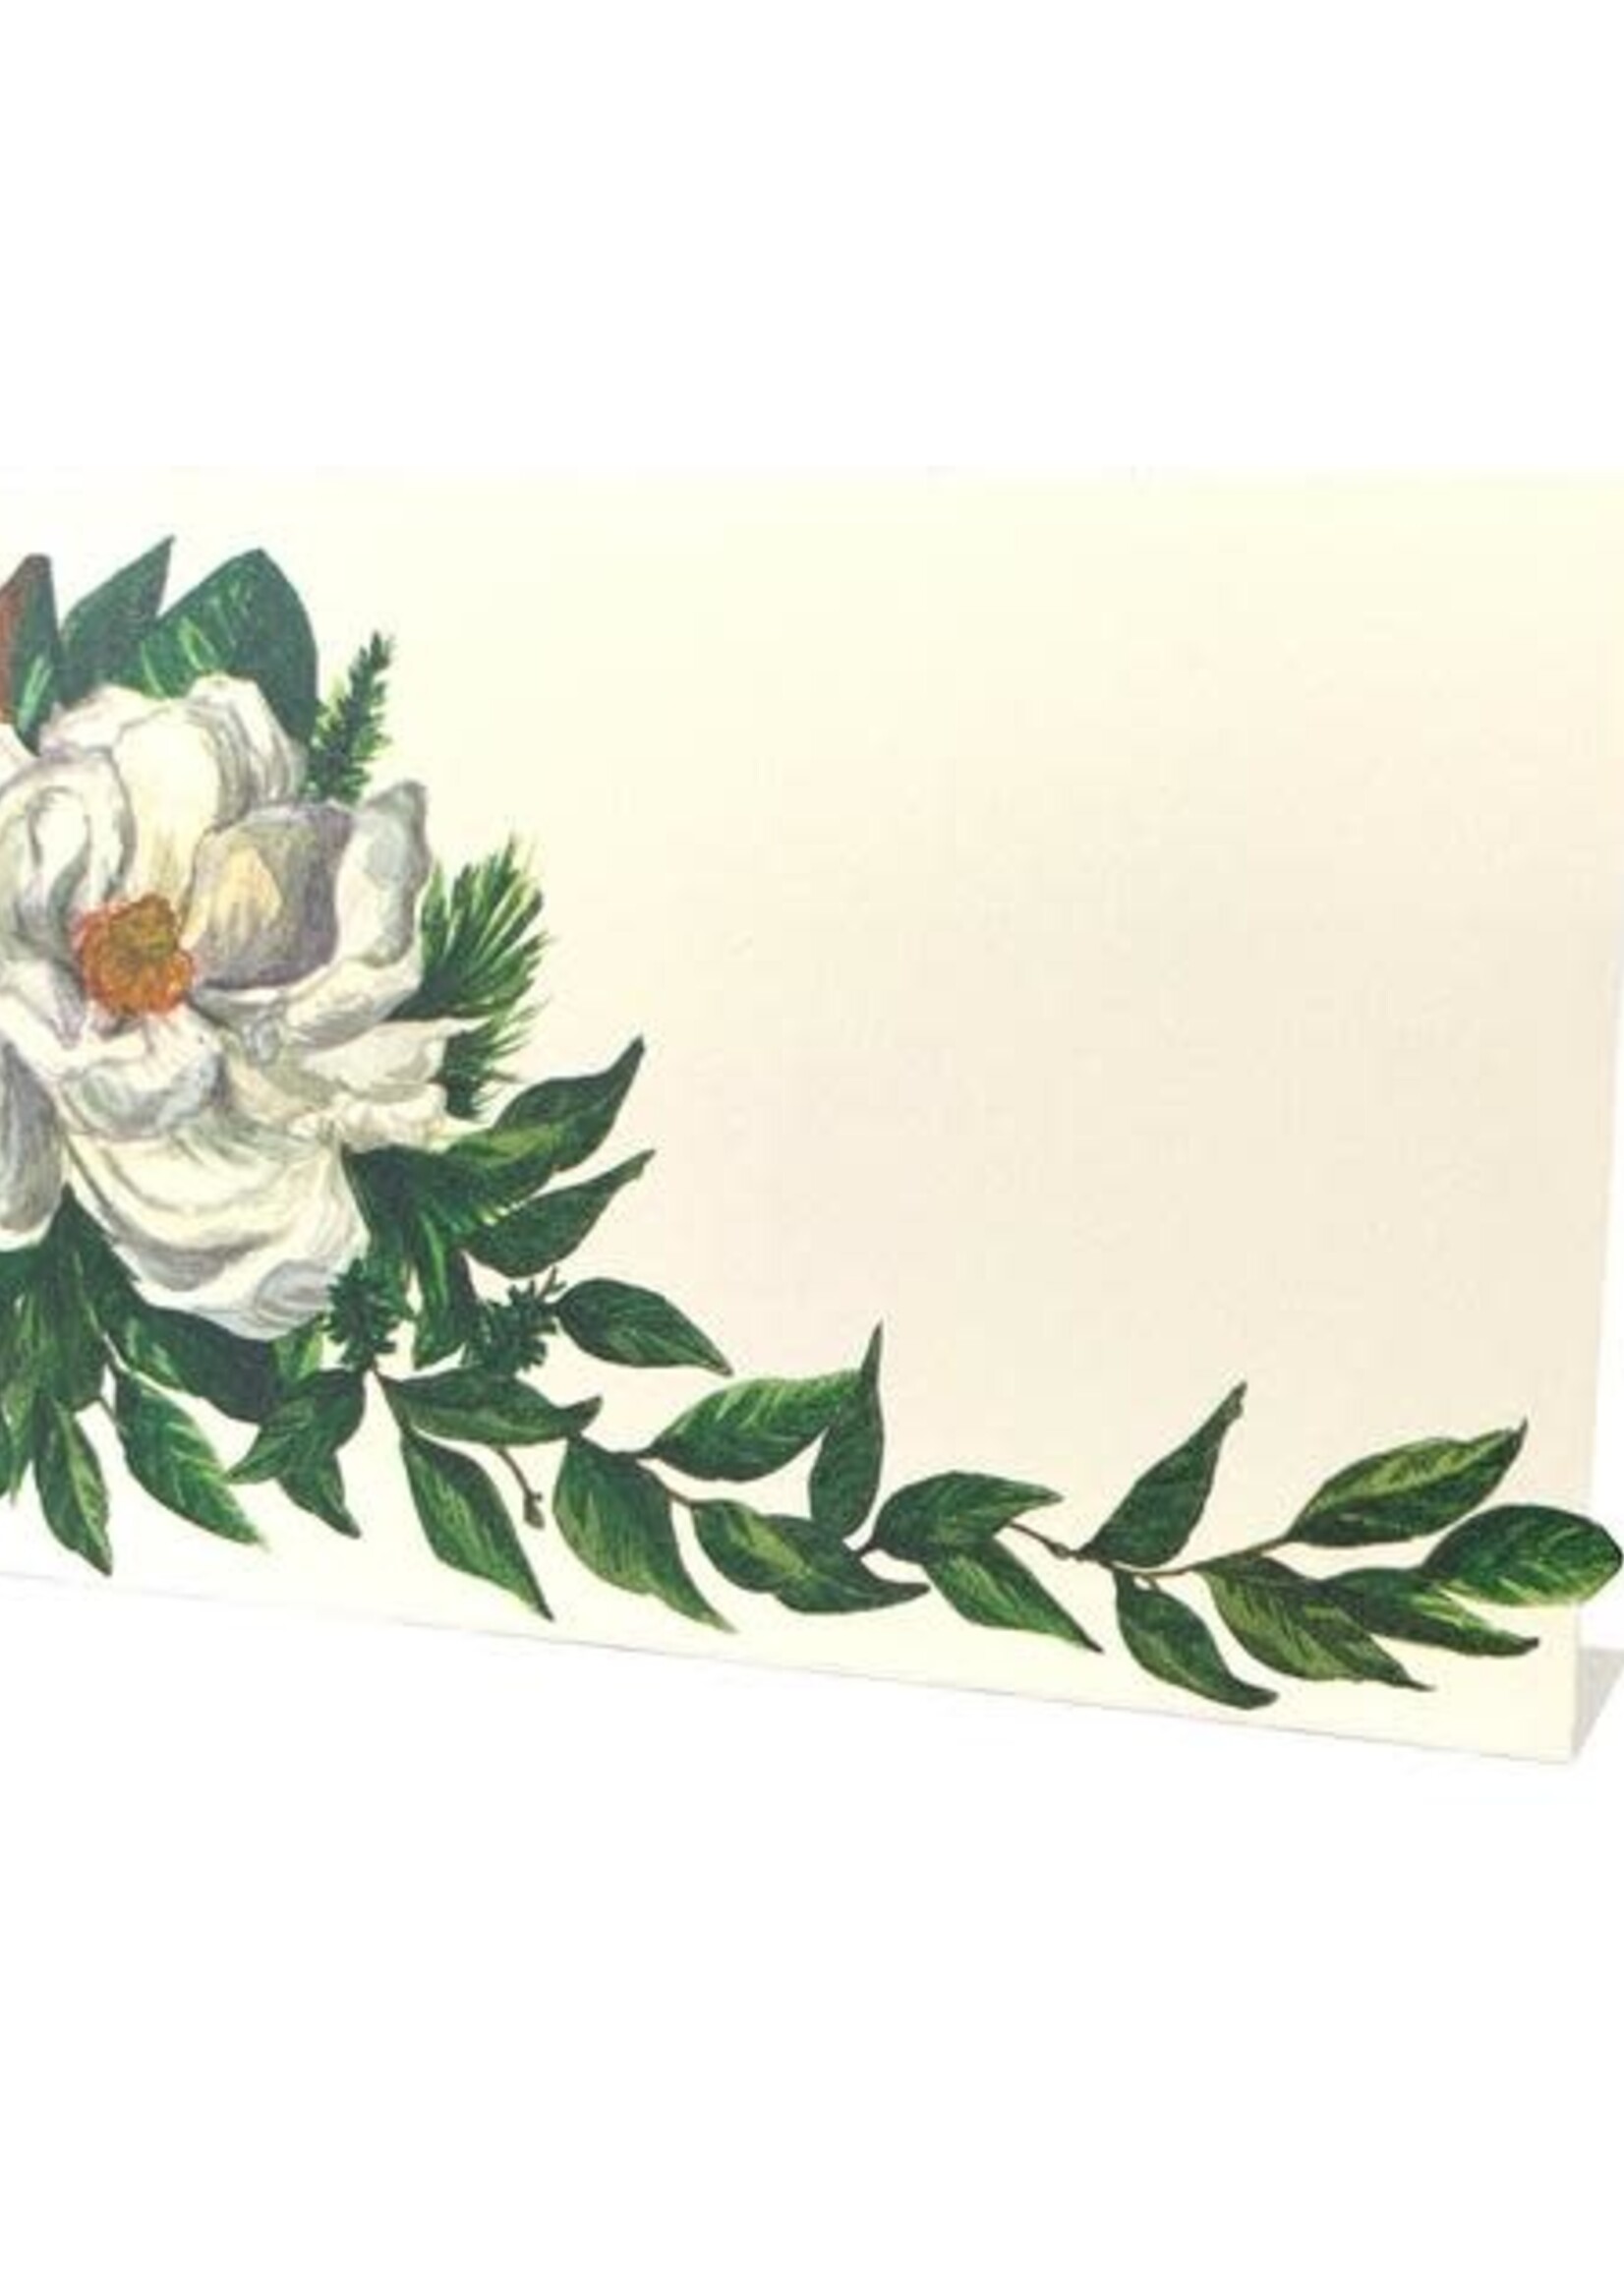 Hester & Cook Magnolia Place Card - Pack of 12